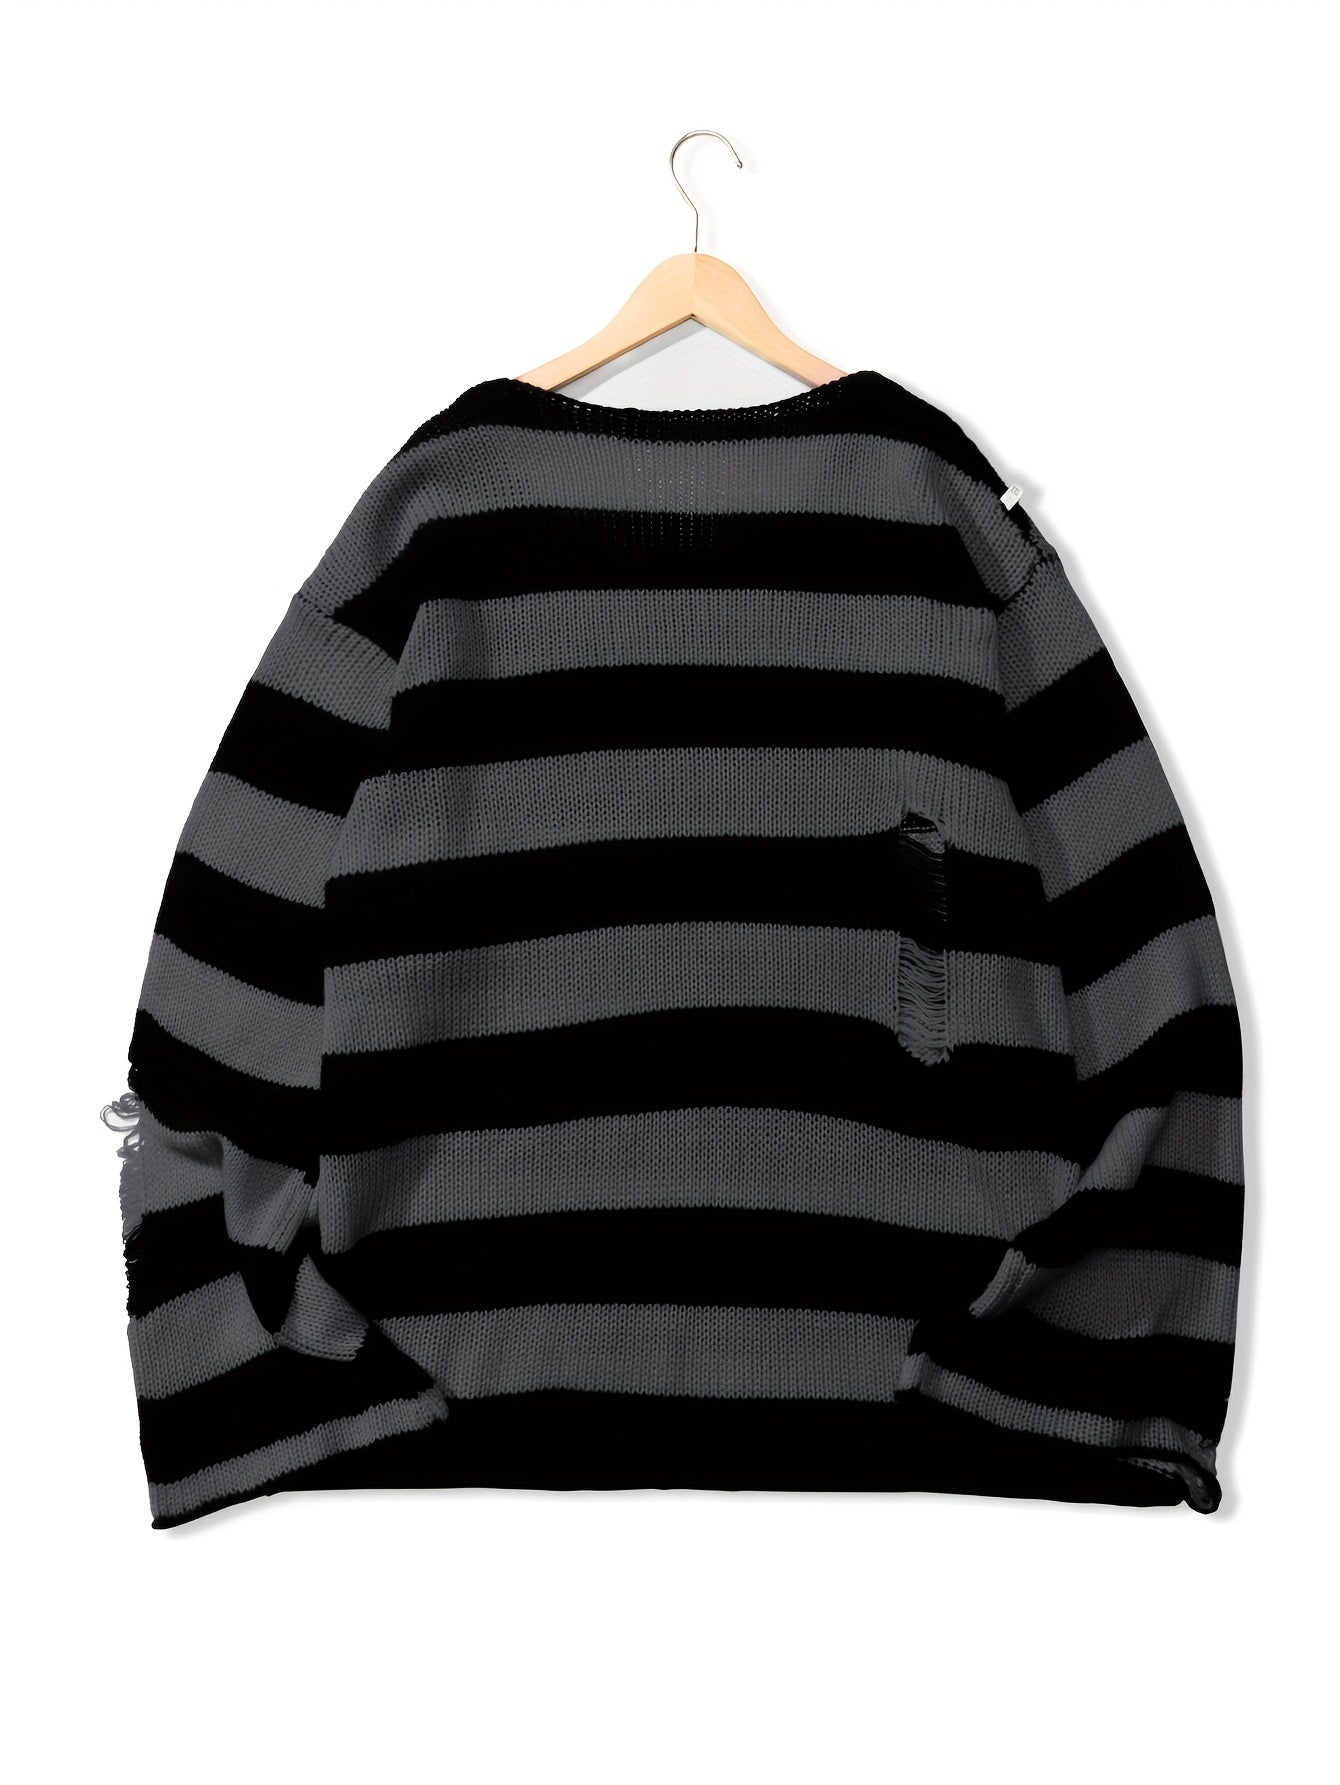 Antmvs All Match Knitted Ripped Striped Sweater, Men's Casual Warm Slightly Stretch Crew Neck Pullover Sweater For Fall Winter